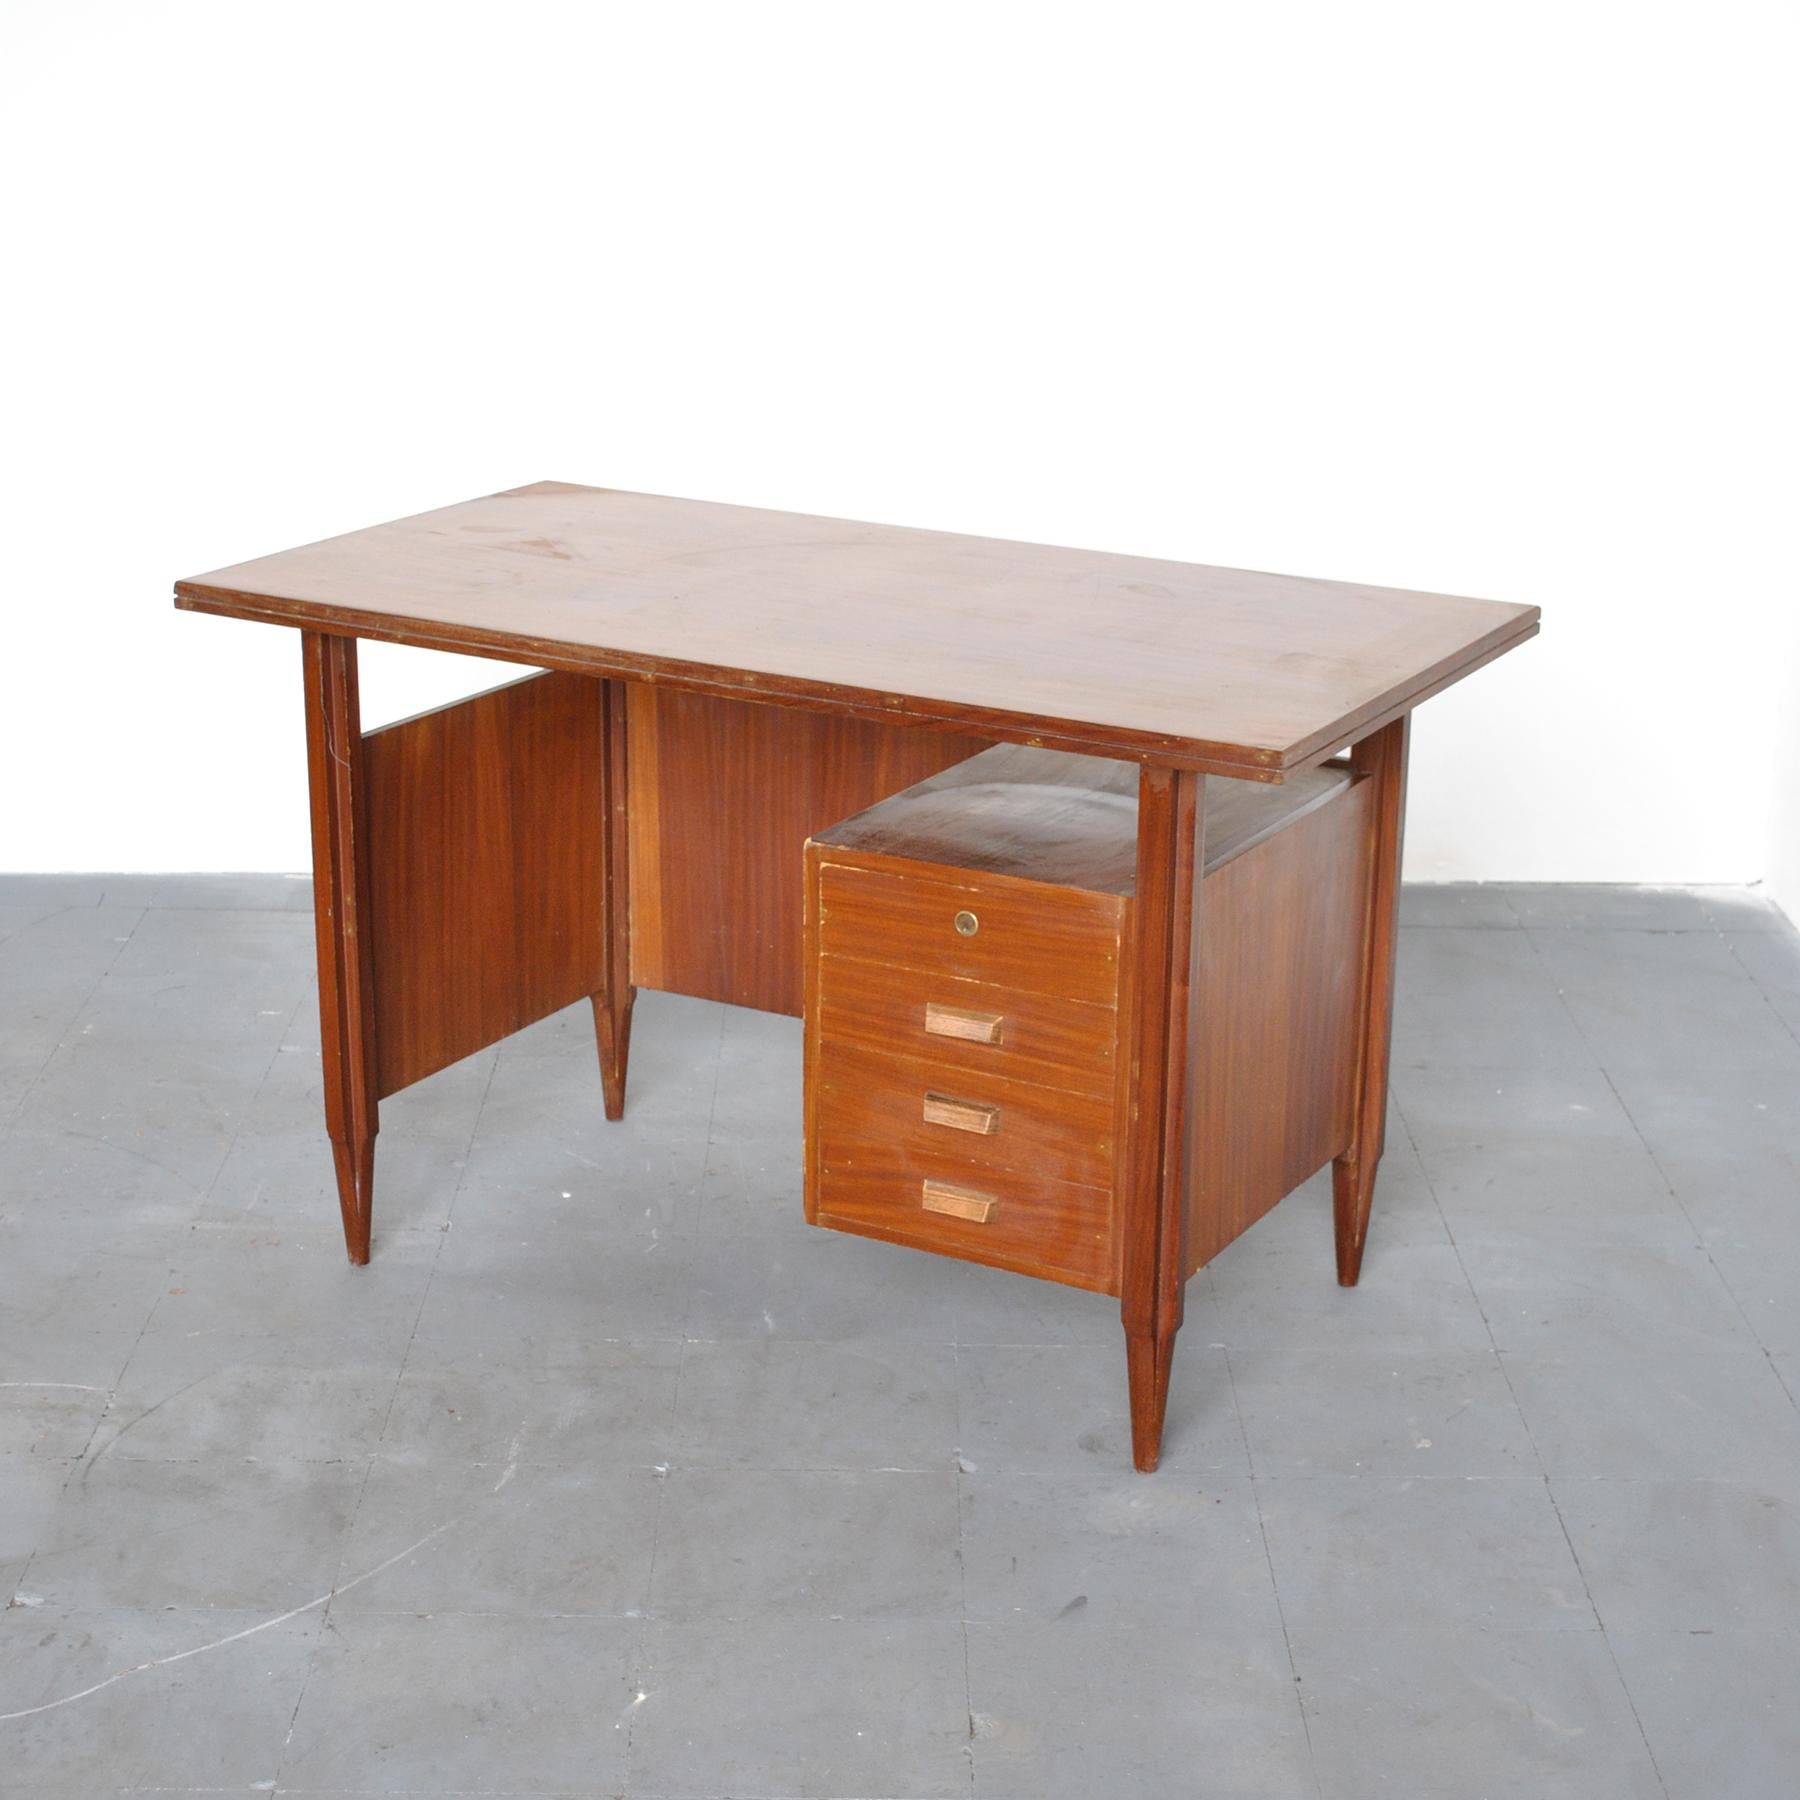 Wooden desk from the measurements contained with chest of drawers, Italian, 60s.